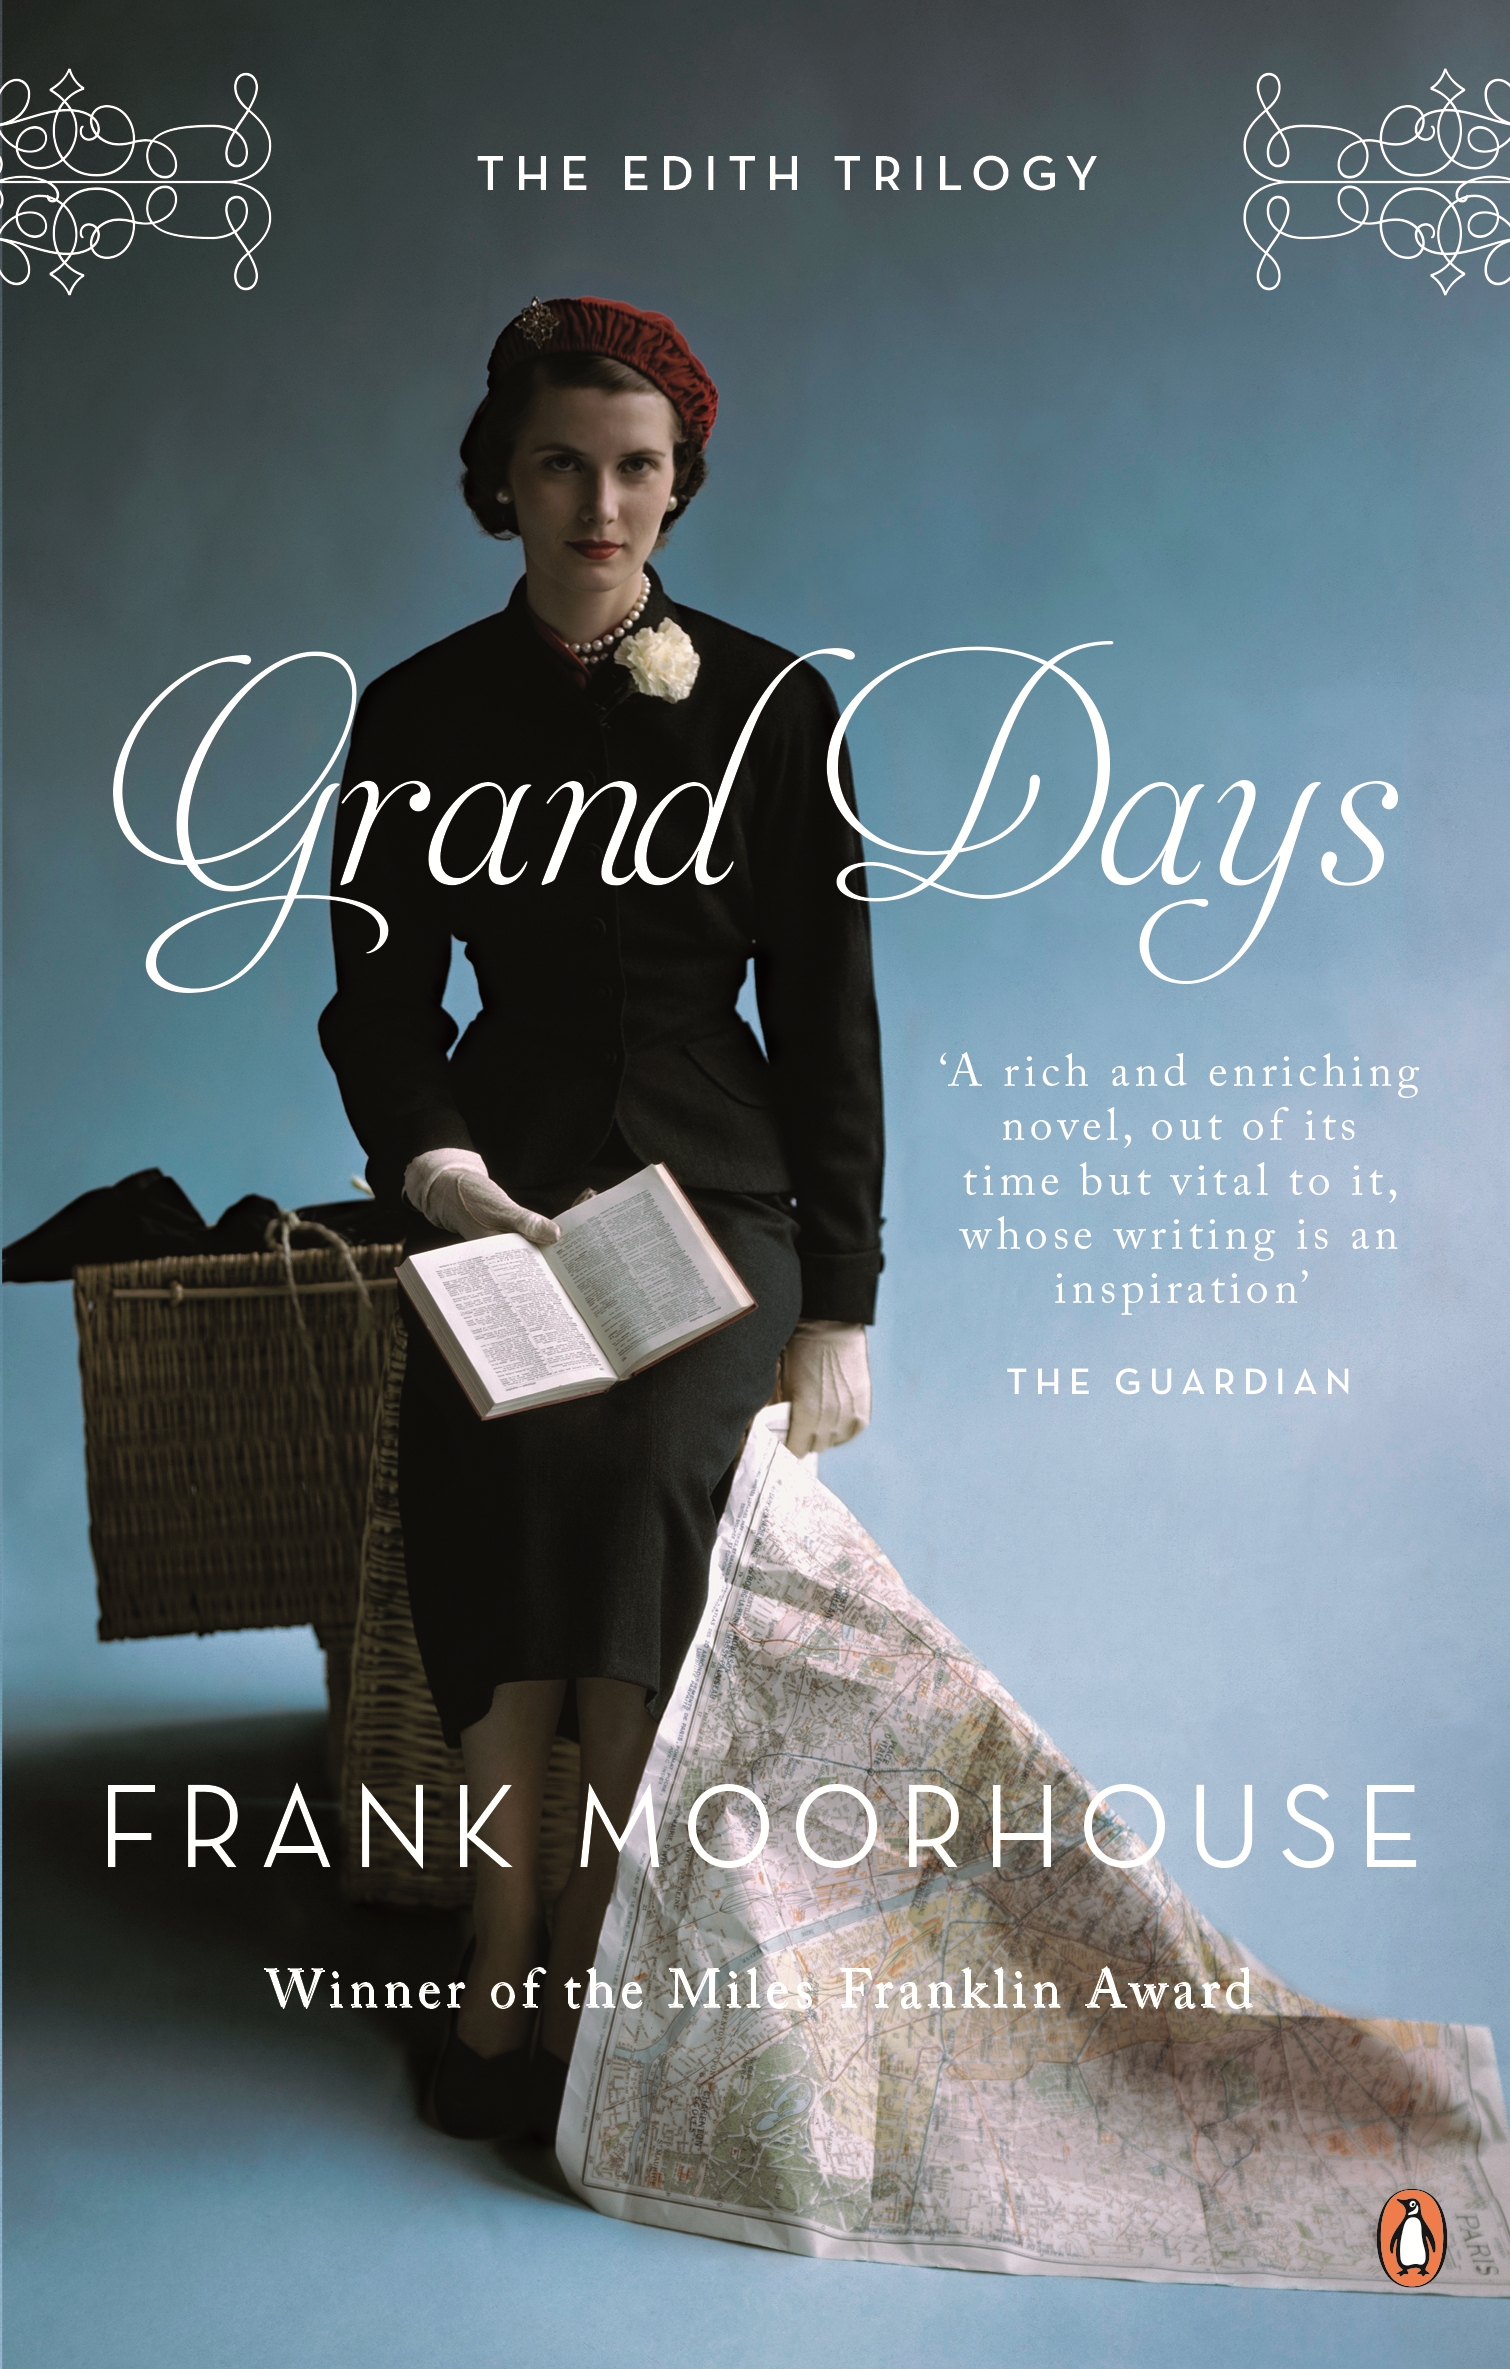 "Cover of Grand Days by Frank Moorhouse"